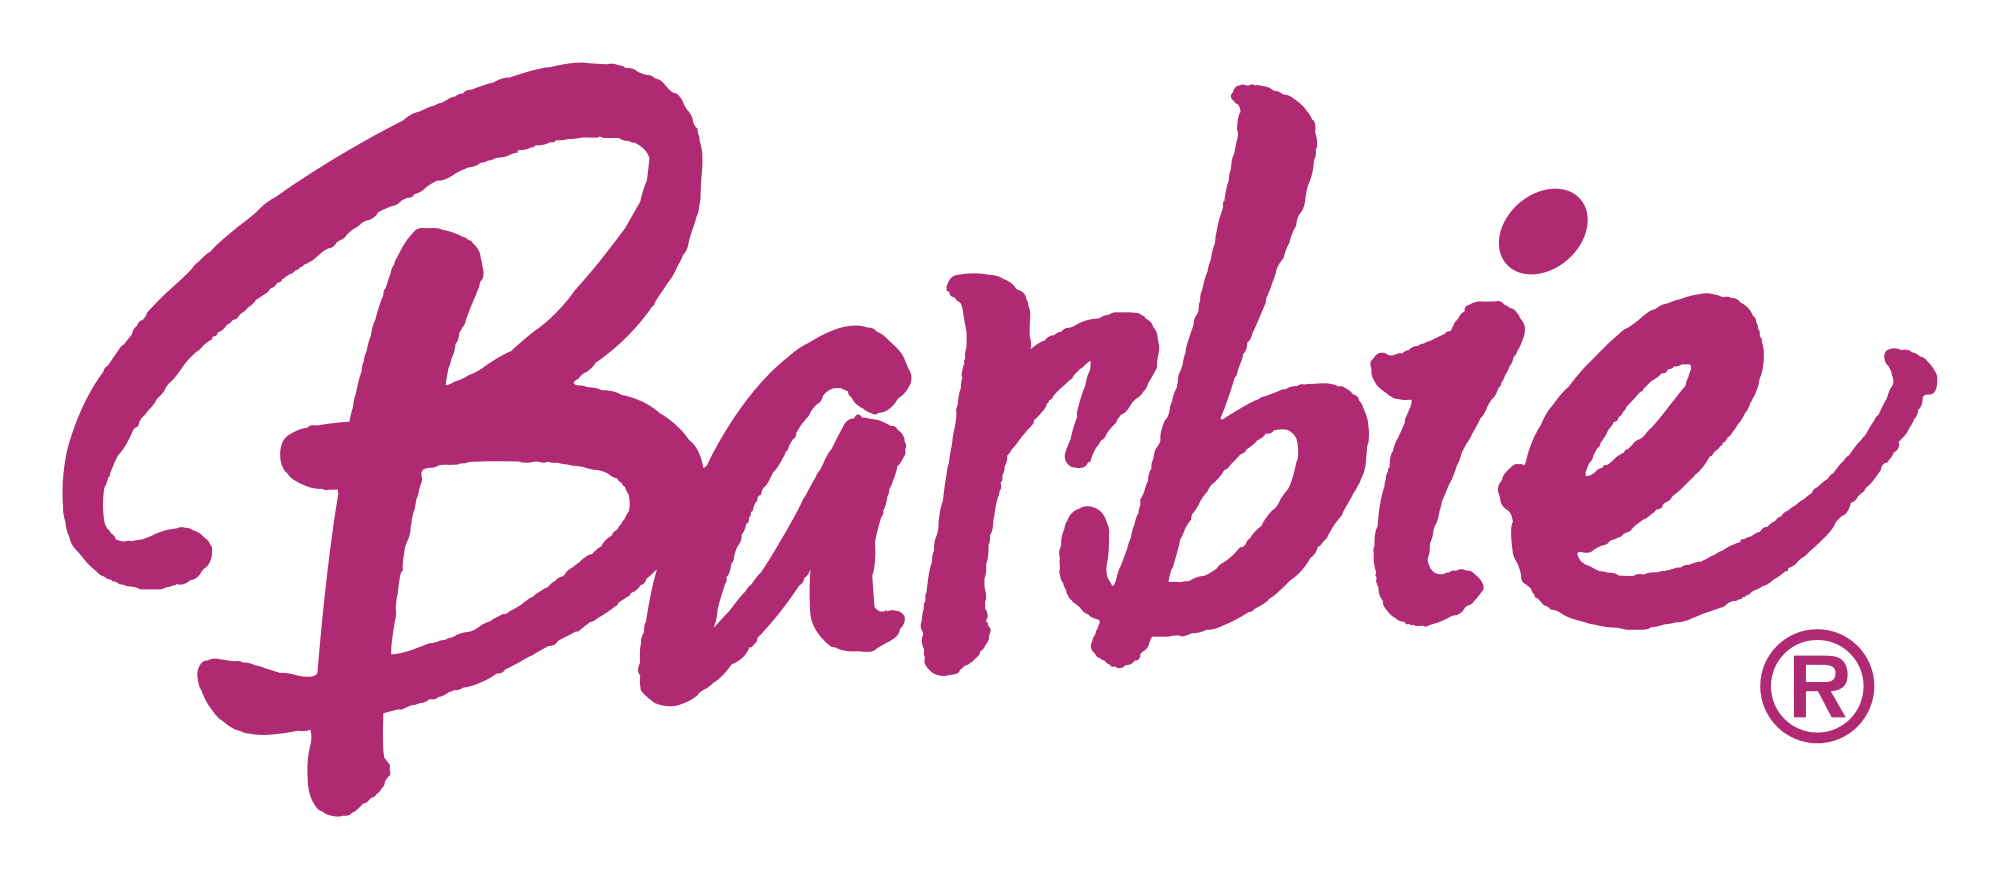 Png images free download. Barbie clipart logo